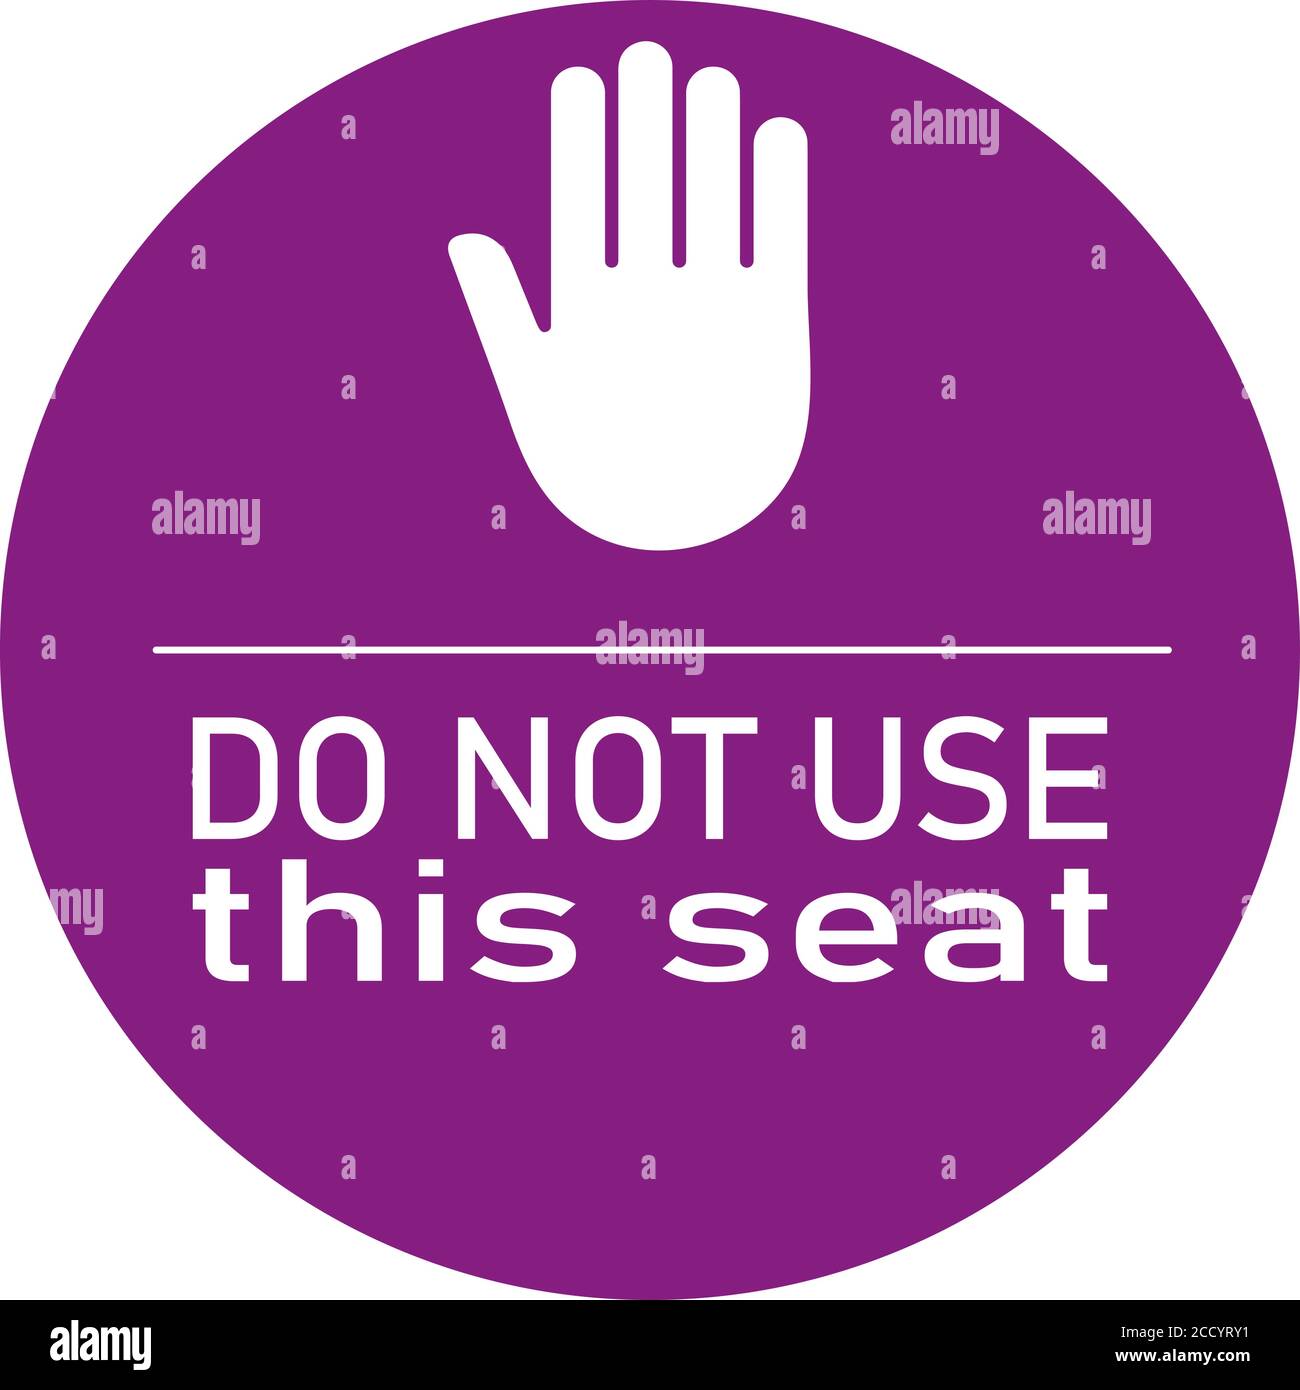 Prohibition sign with the text Do not use this seat on a purple circle Stock Vector